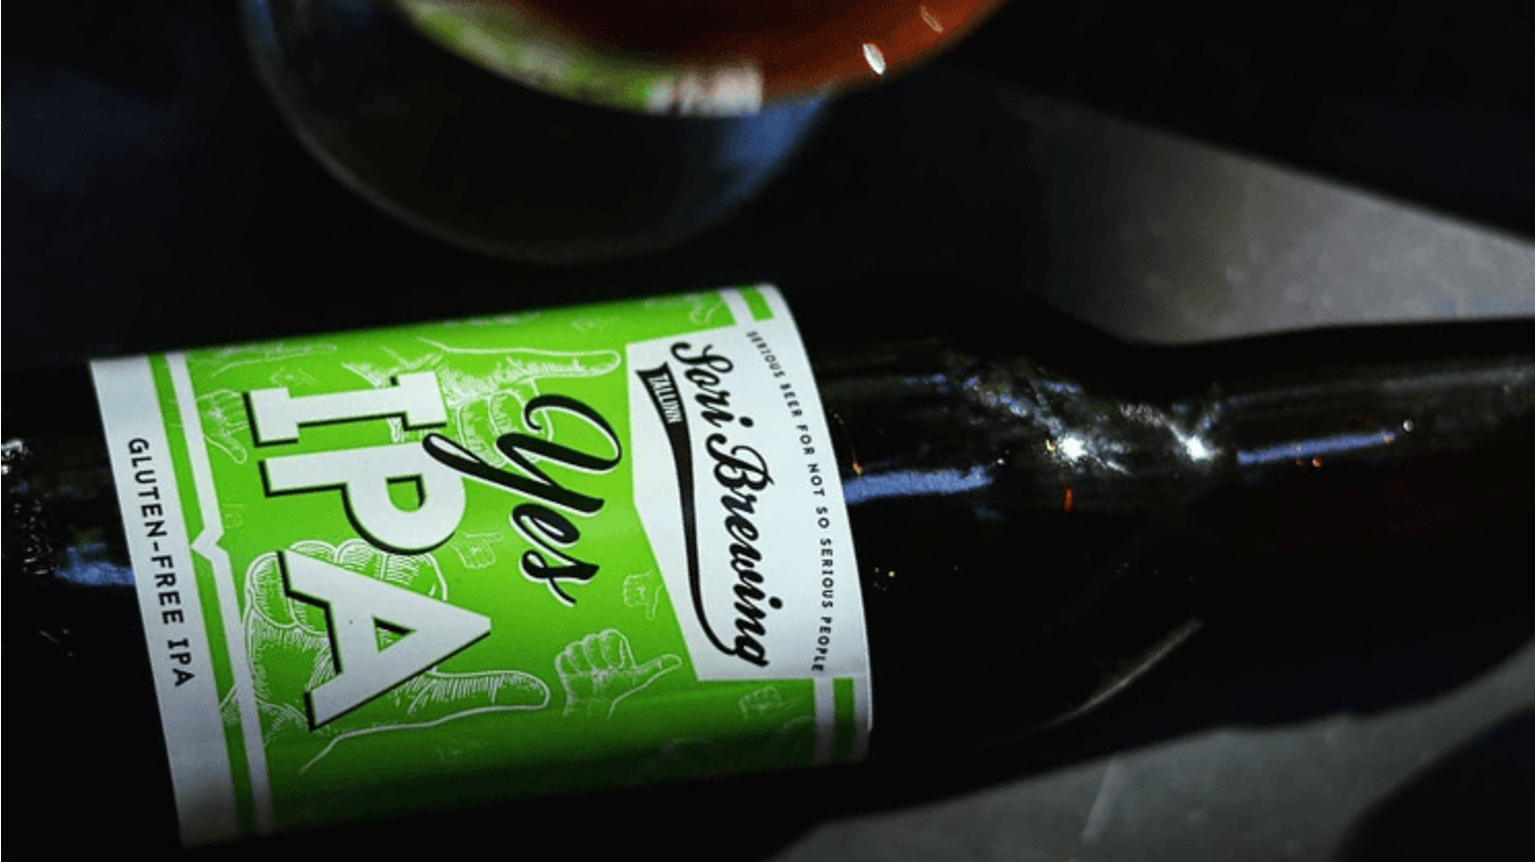 thumbnail for blog article named: Onze IPA bier top 10